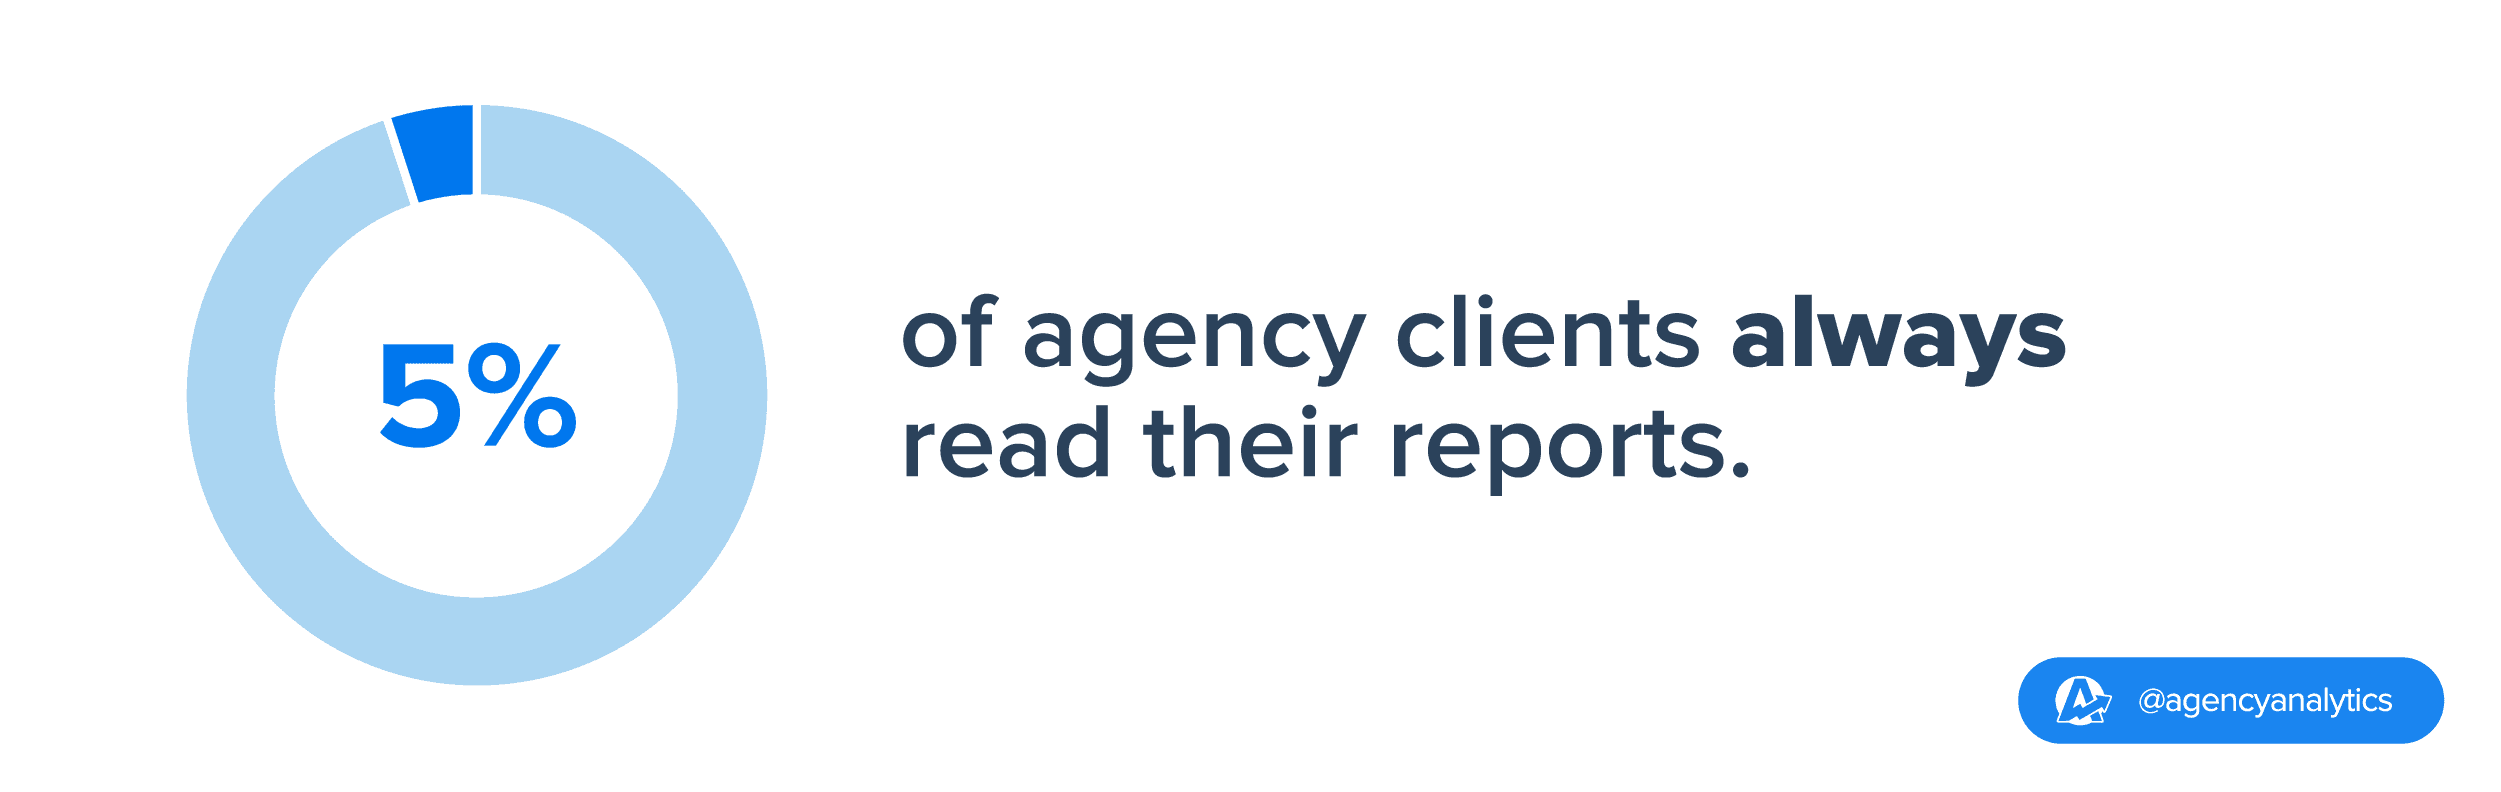 stat on frequency clients read reports 